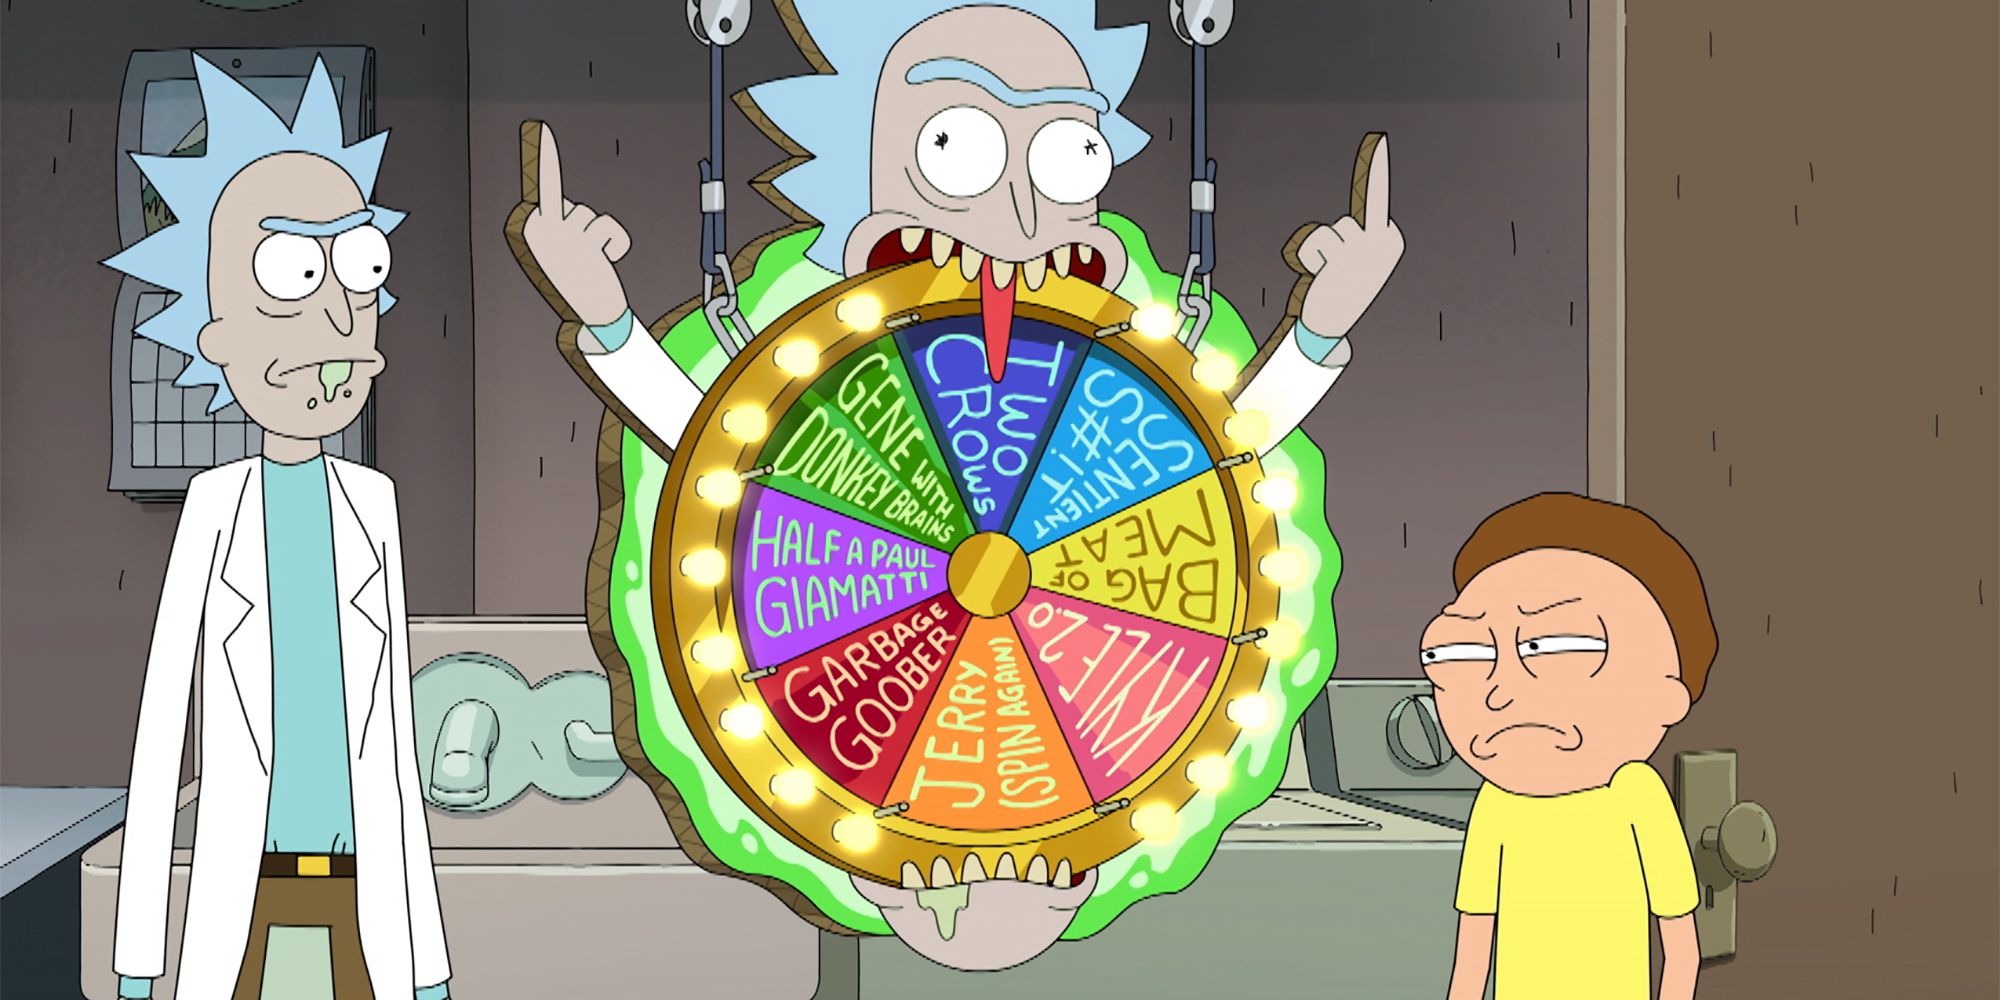 Rick taunting Morty in _Forgetting Sarick Mortshall_